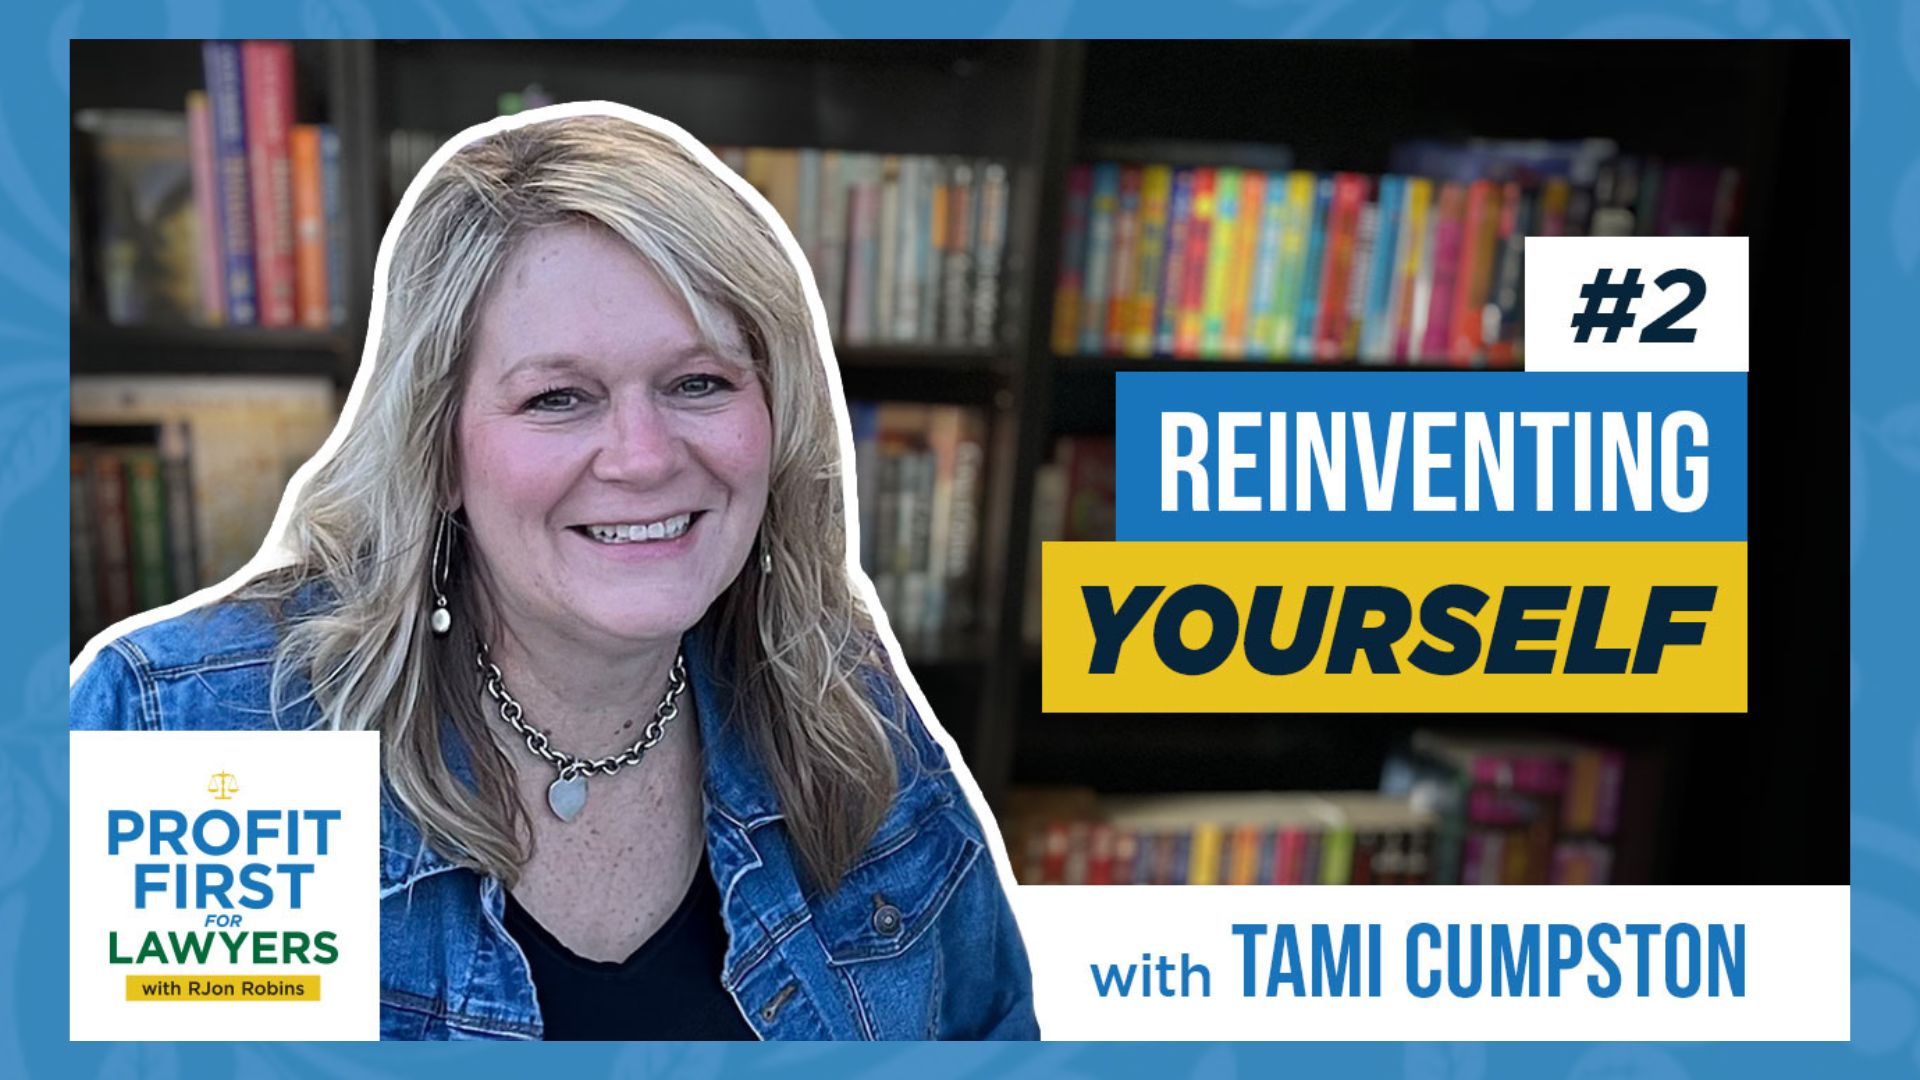 photo of Tami Cumpston from Team RJon for episode 2 of the Profit First For Lawyers podcast on the topic of Reinventing Yourself.